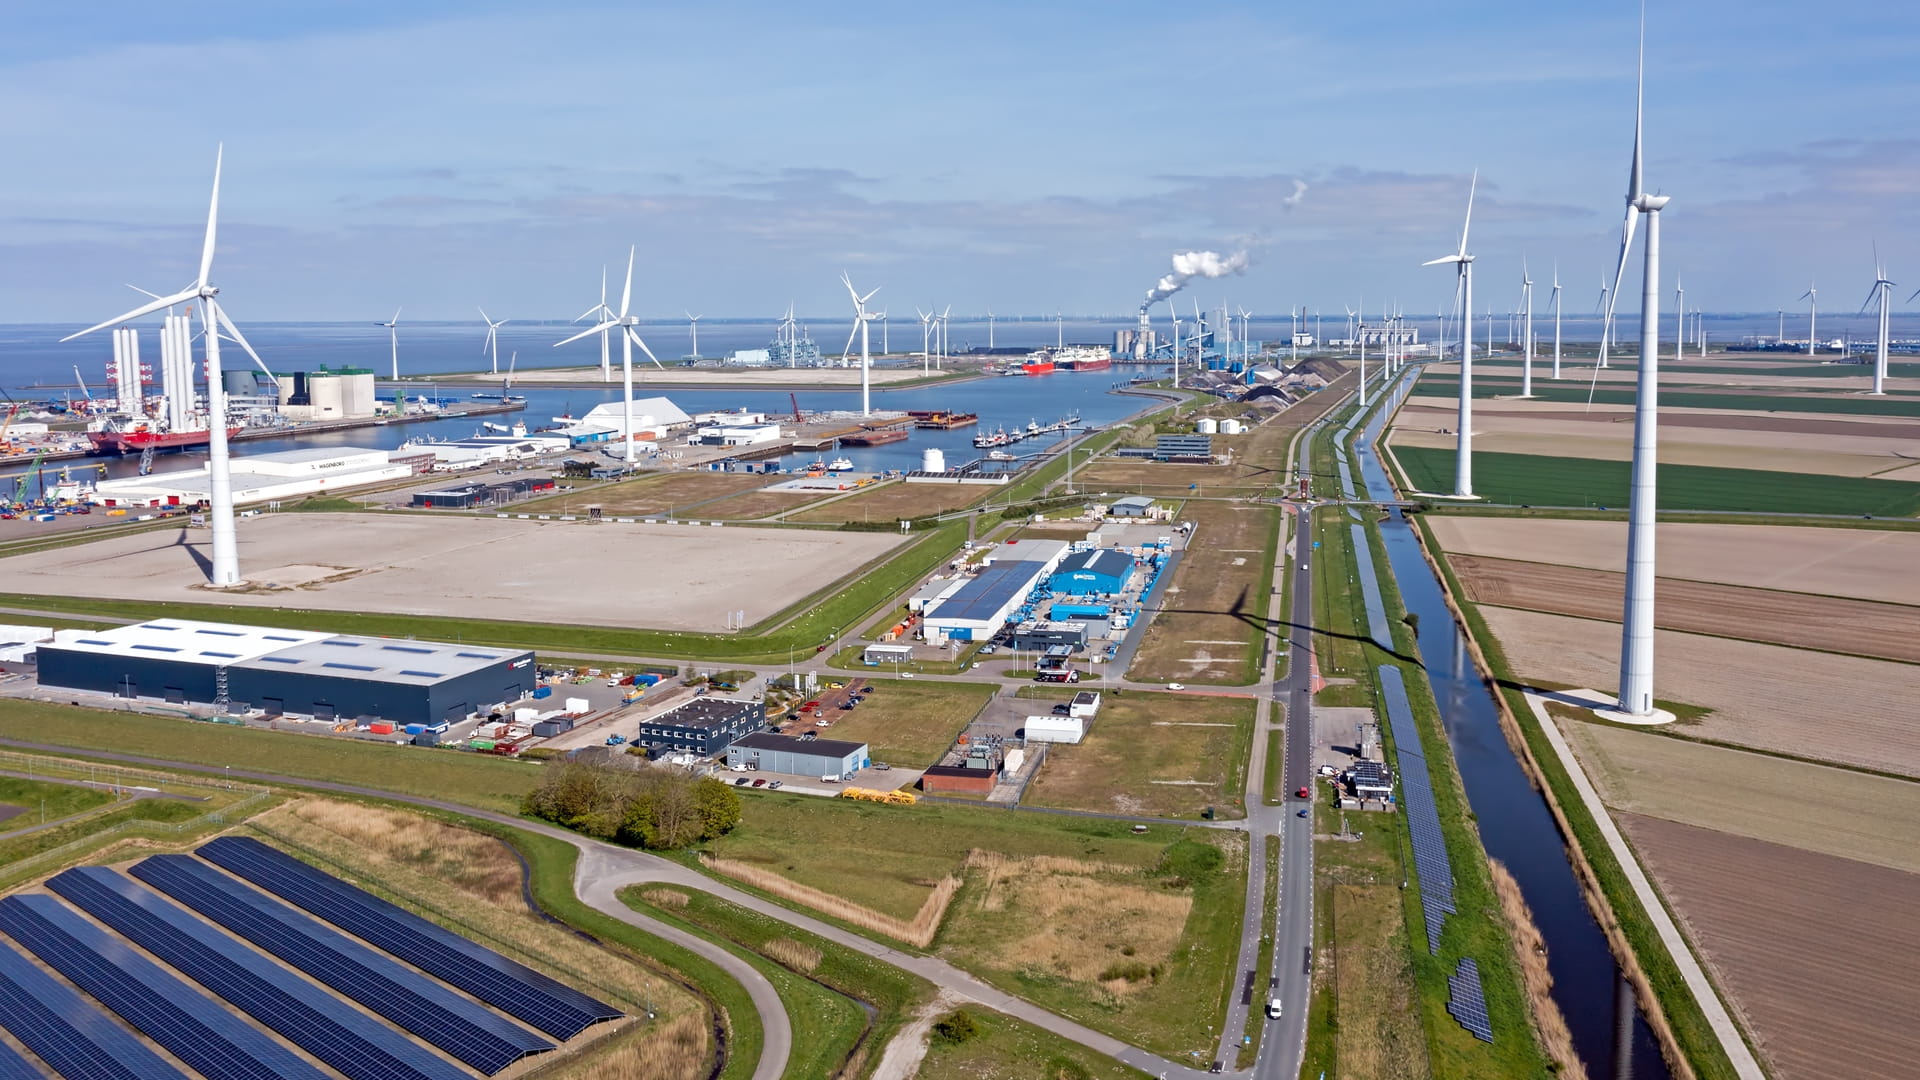 An aerial view of a harbor with wind turbines and solar panels. This is an example of maritime decarbonization. Wind and solar power are two renewable energy sources that can help to decarbonize the maritime industry.